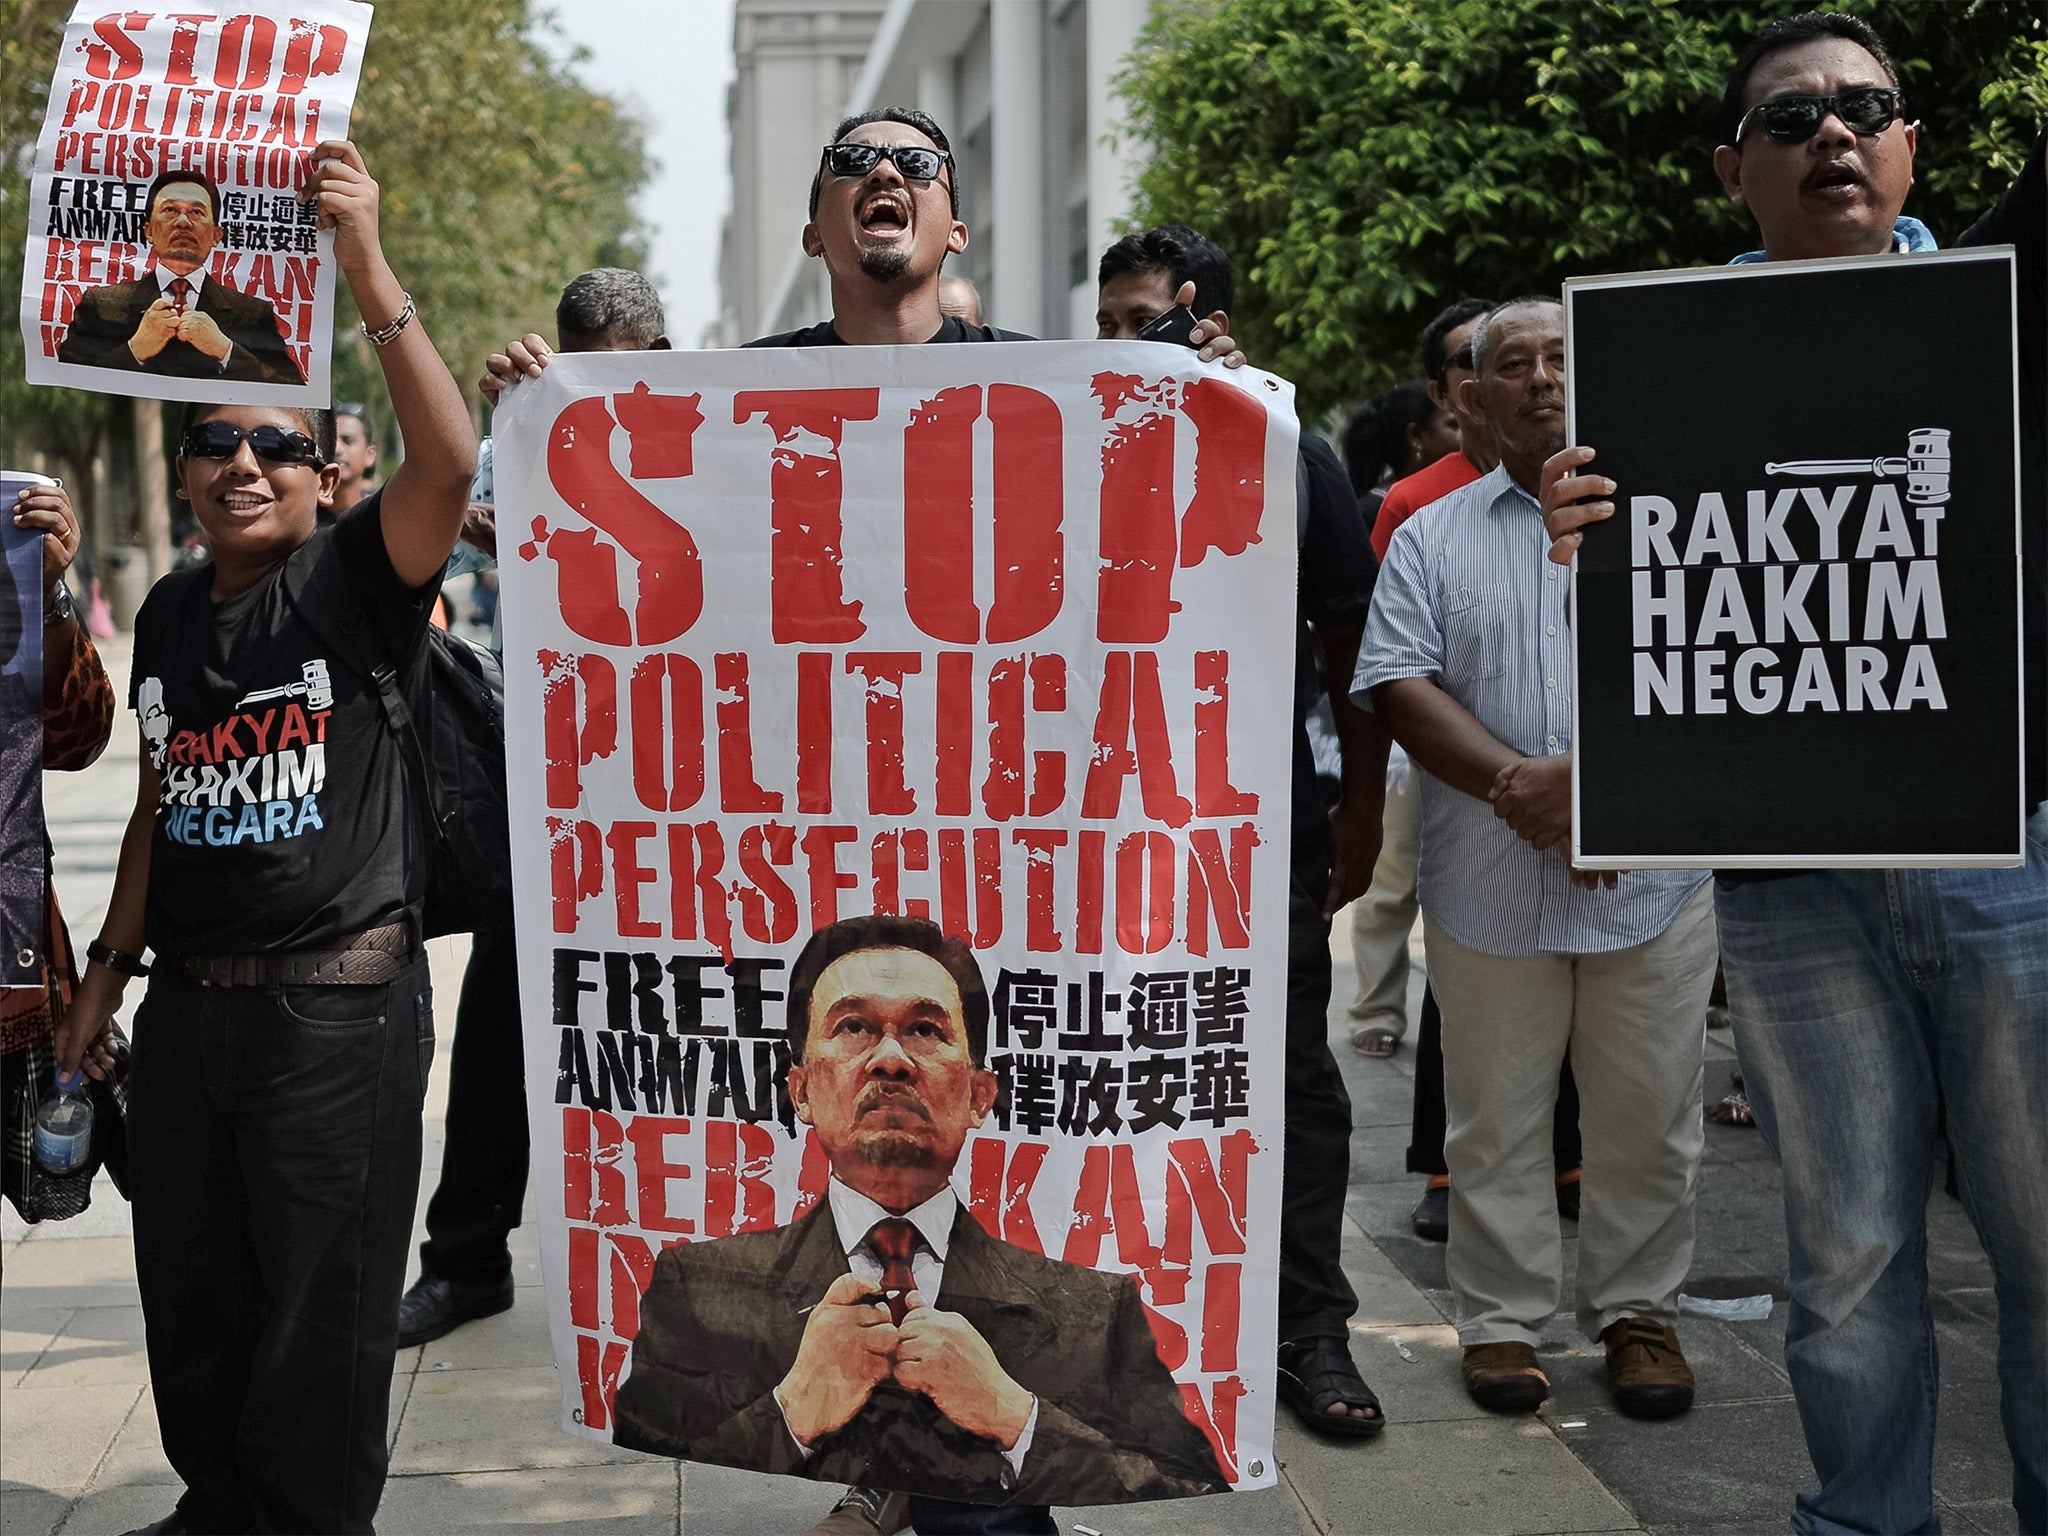 Anwar Ibrahim supporters protest outside the appeal court in Putrajaya